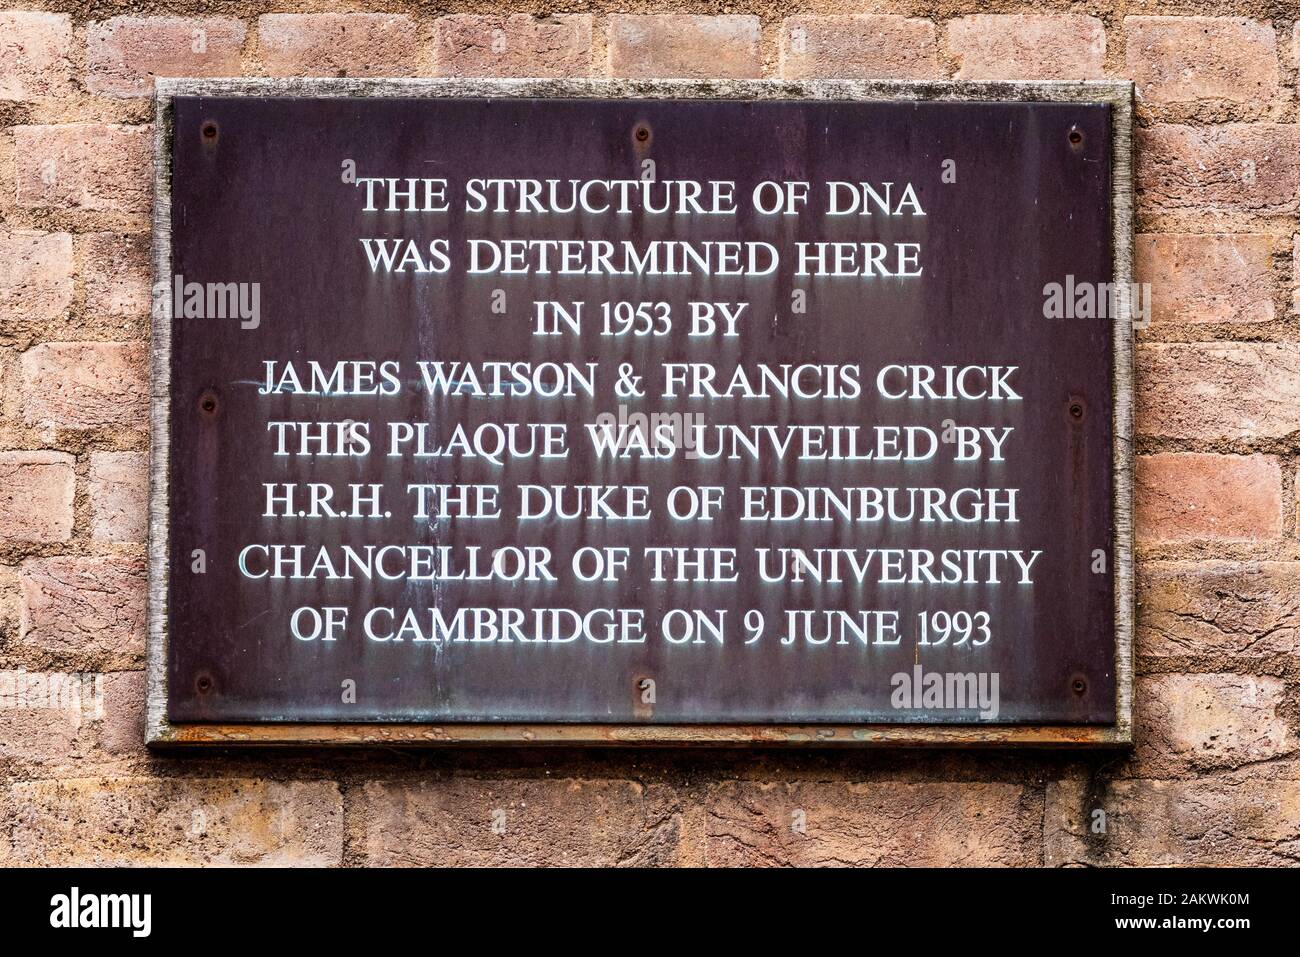 DNA Structure Plaque Cambridge - Plaque commemorating the discovery of the structure of DNA at the old Cavendish Laboratory at Cambridge University. Stock Photo